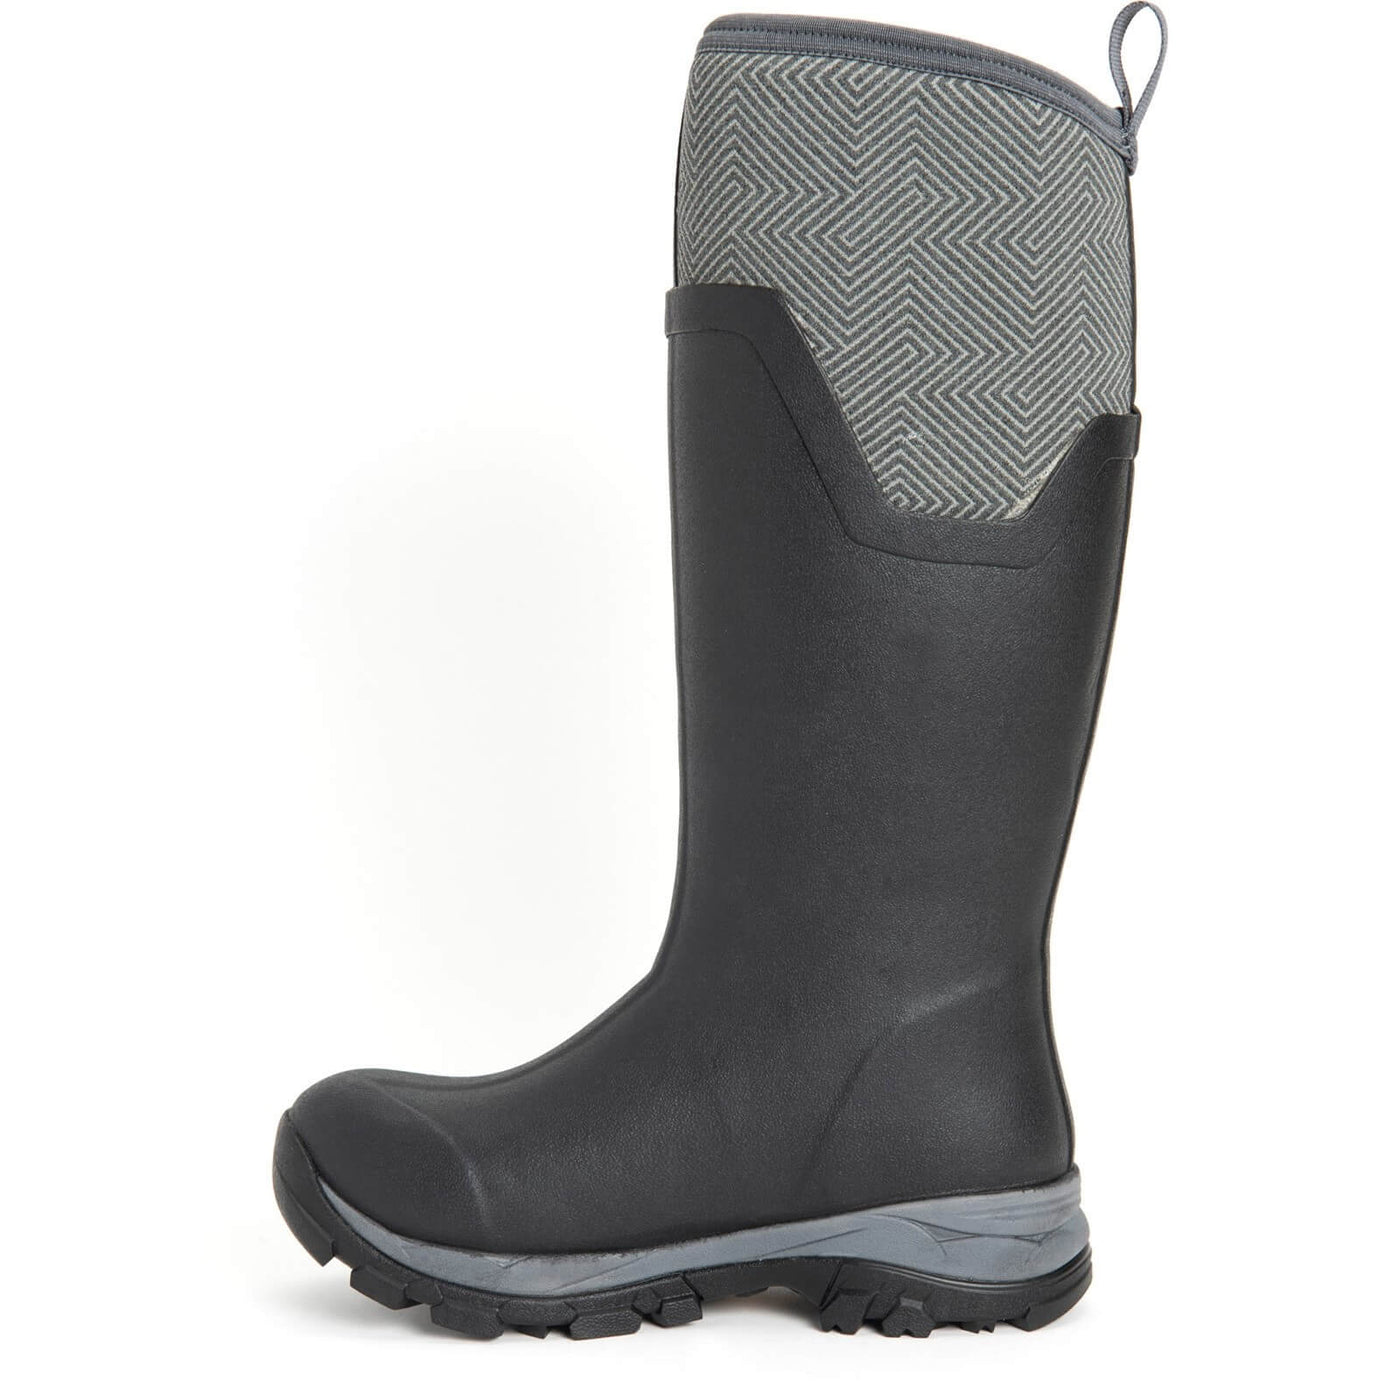 Muck Boots Arctic Ice Tall Wellington Boots Black/Grey Geometric 7#colour_black-grey-geometric